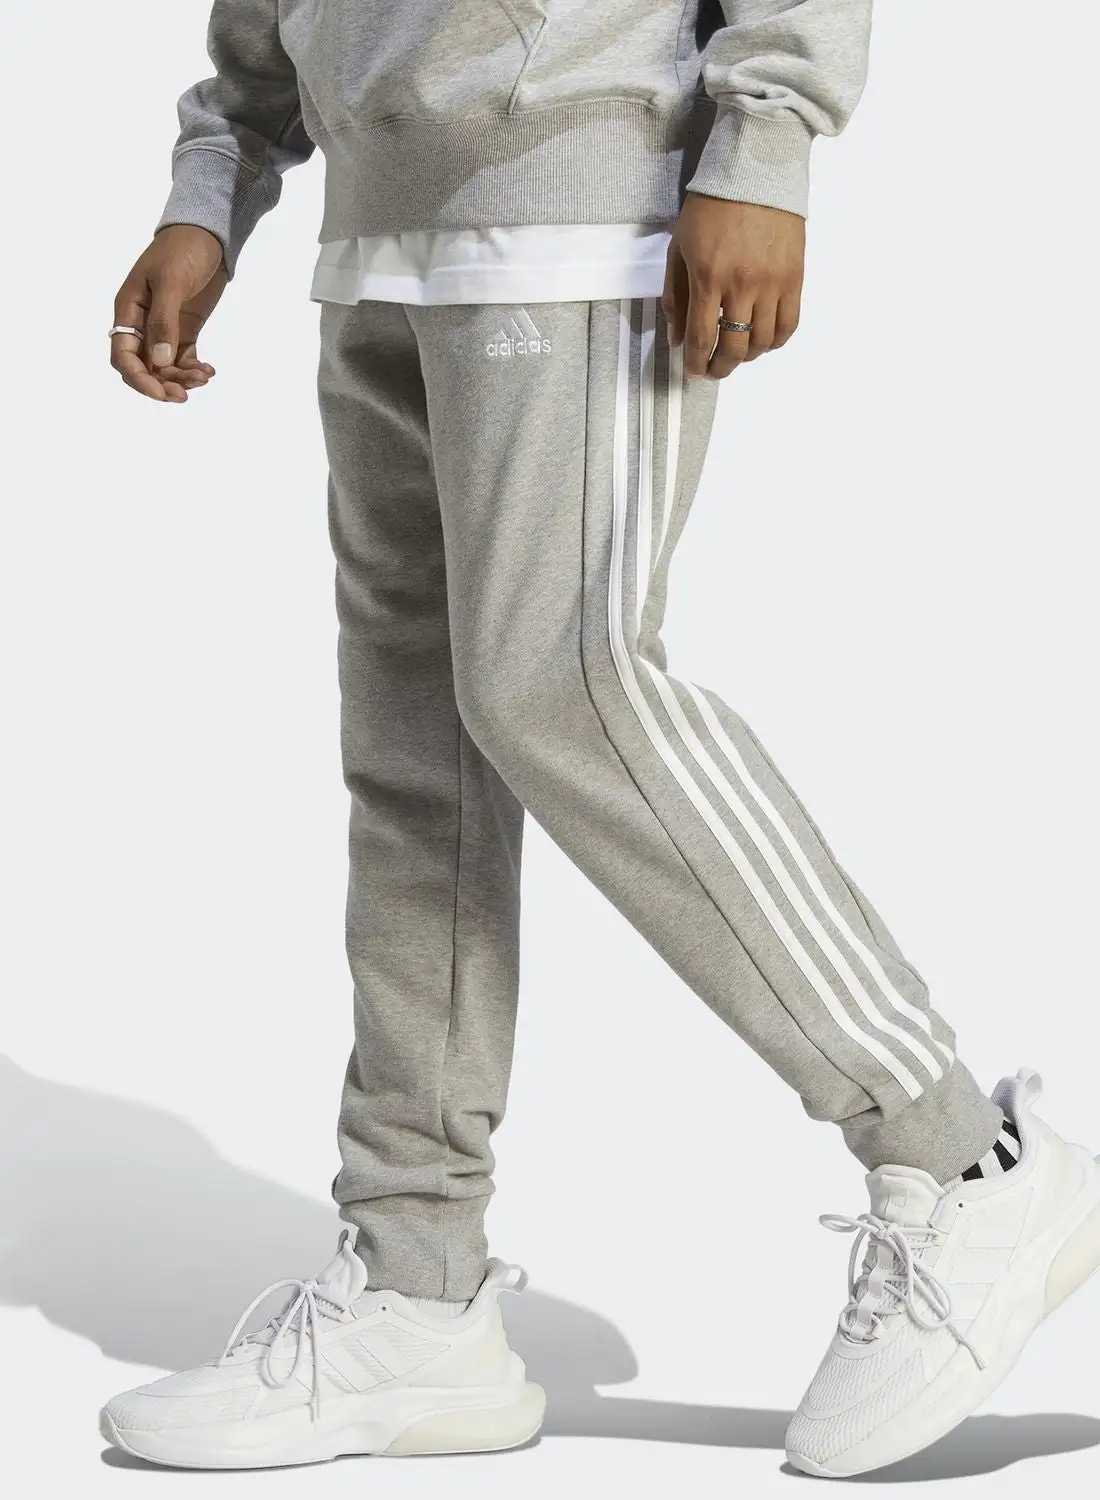 Adidas 3 Stripes Essential French Terry Sweatpants